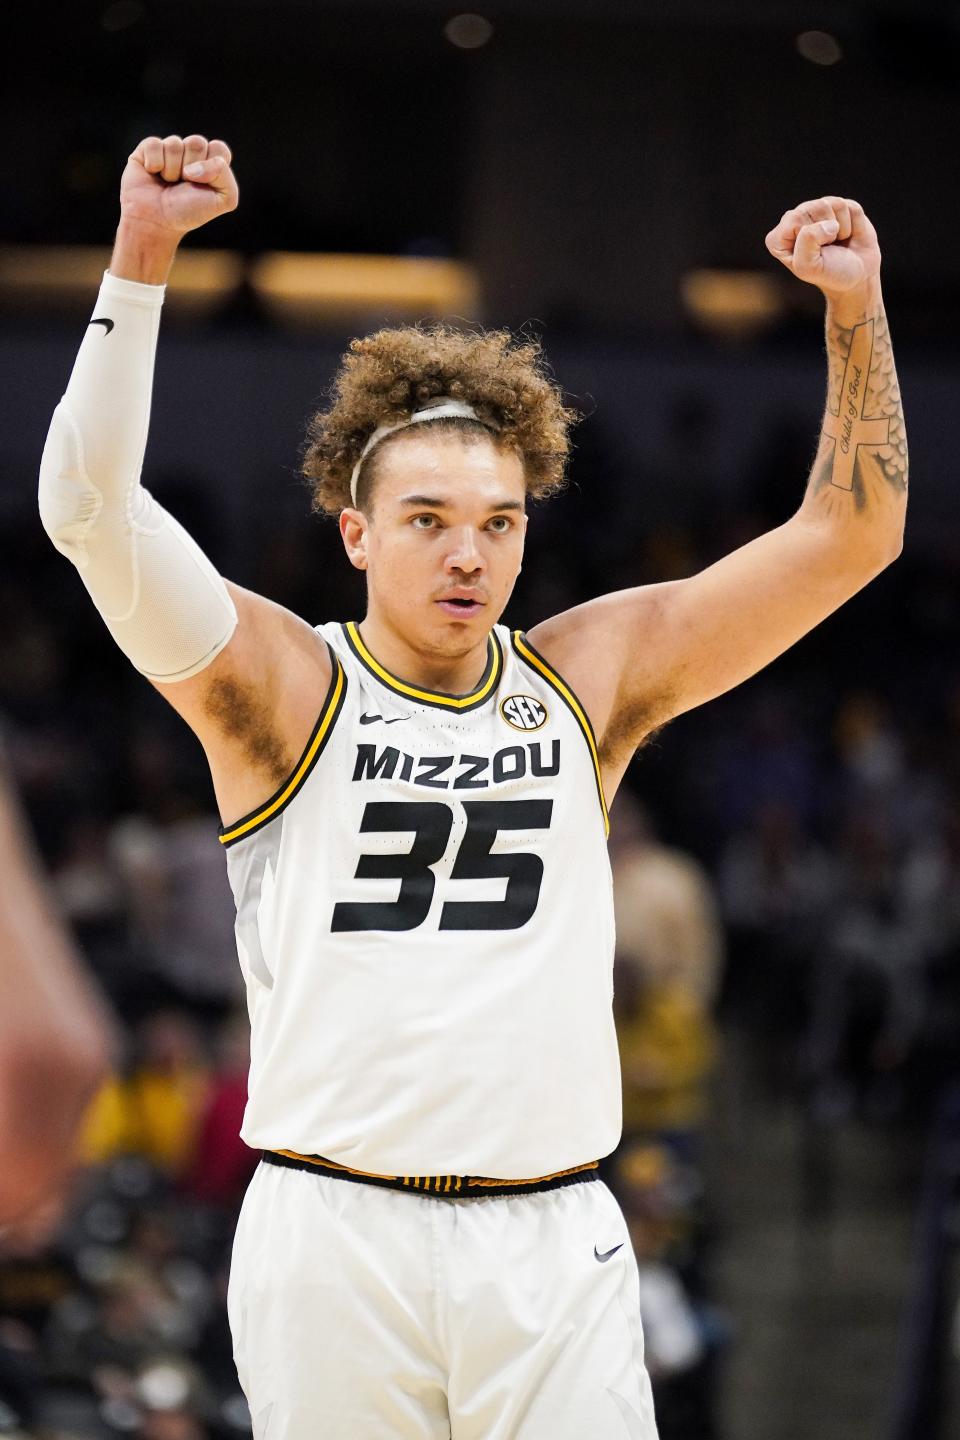 Dec 30, 2023; Columbia, Missouri, USA; Missouri Tigers forward Noah Carter (35) celebrates after a free throw against the Central Arkansas Bears during the first half at Mizzou Arena. Mandatory Credit: Denny Medley-USA TODAY Sports